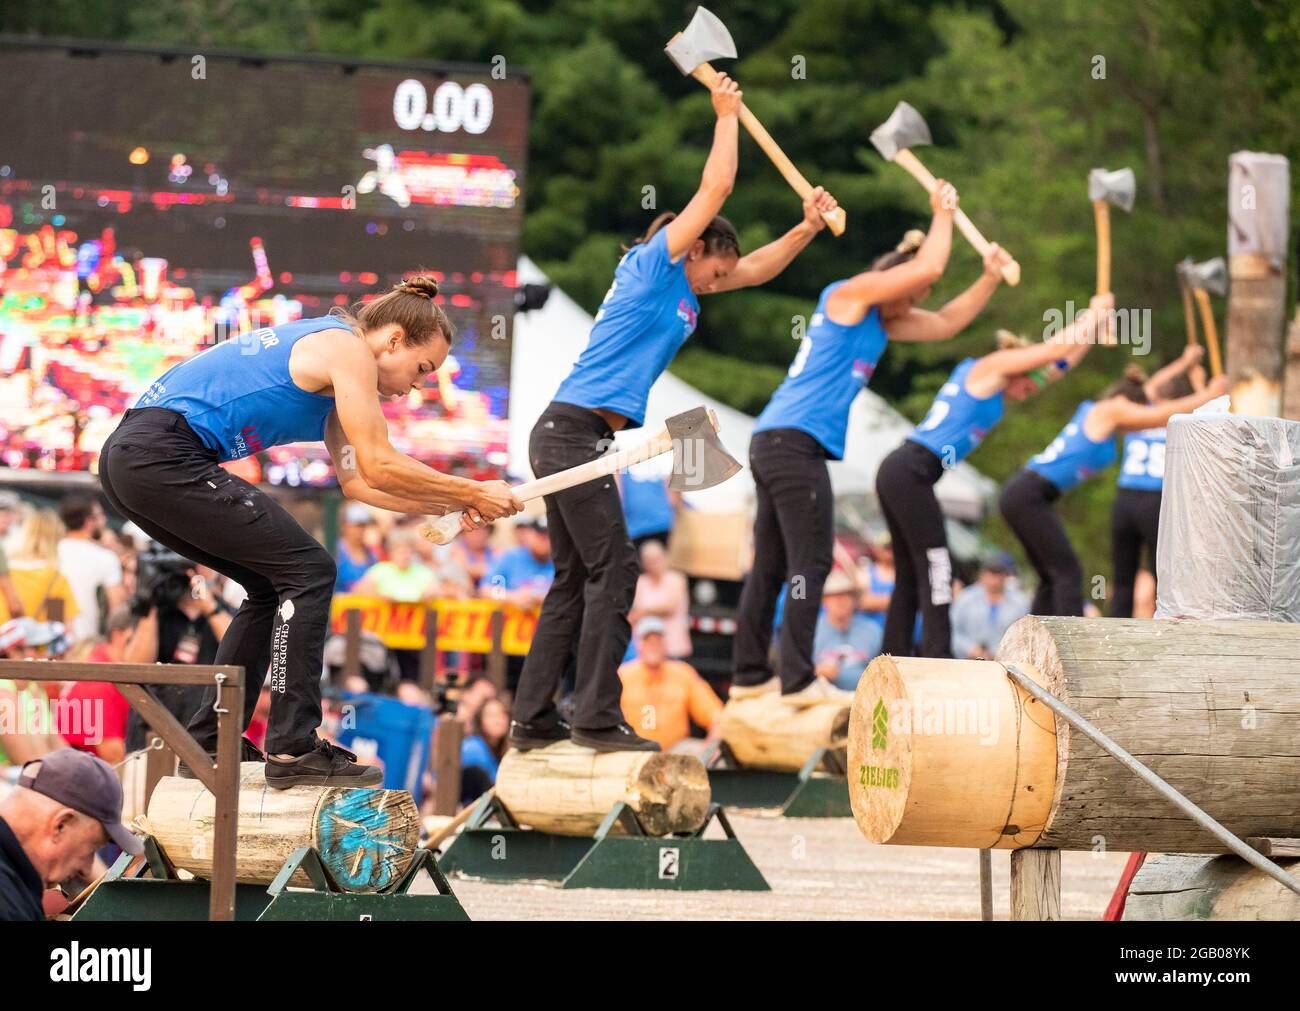 Hayward, USA. 1st Aug, 2021. Competitors use axes to chop wood during the 61st Lumberjack World Championships in Hayward, Wisconsin, the United States, on July 31, 2021. The championships held here showcased lumberjacks and lumberjills competing in sawing, chopping, speed climbing, log rolling, and boom-running. Credit: Joel Lerner/Xinhua/Alamy Live News Stock Photo